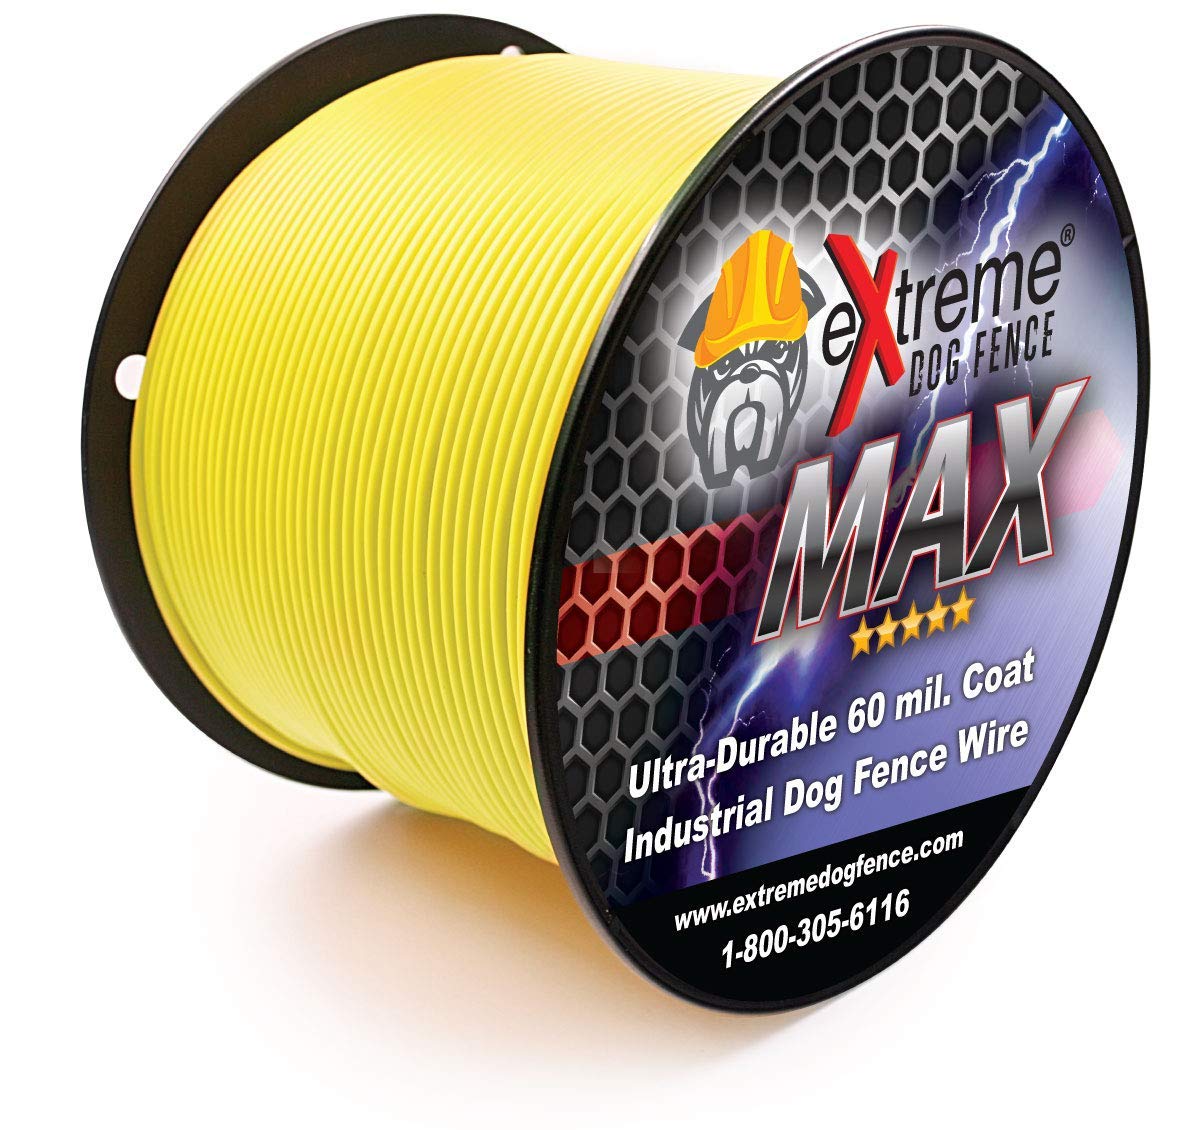 Extreme Dog Fence Max Grade Electric Dog Fence - 2 Dog Kit - 1000 Feet of Heavy Duty -Plus Maximum Duty Wire for Ultimate Performance and Reliability